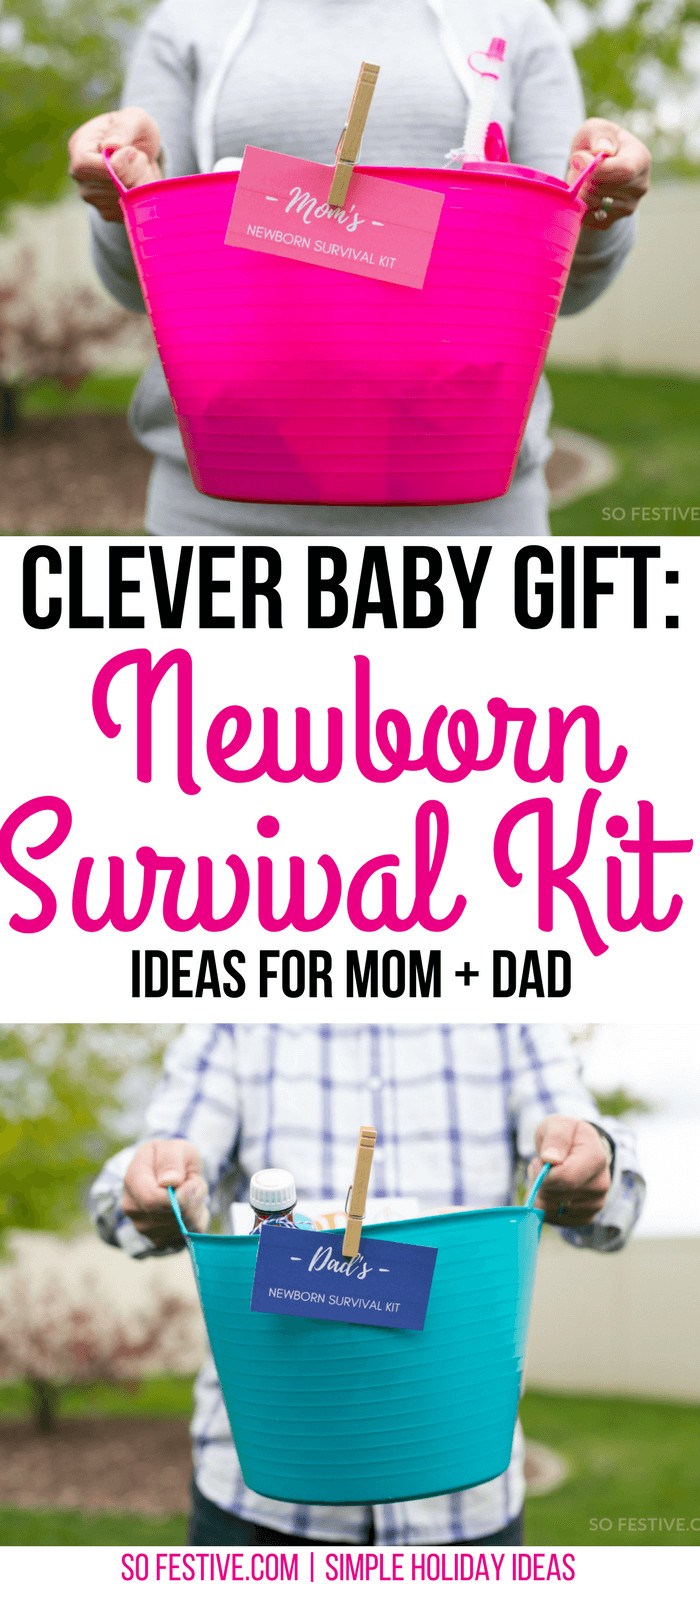 Ideas For New Baby Gift
 How to Make a Newborn Survival Kit for a Baby Shower Gift